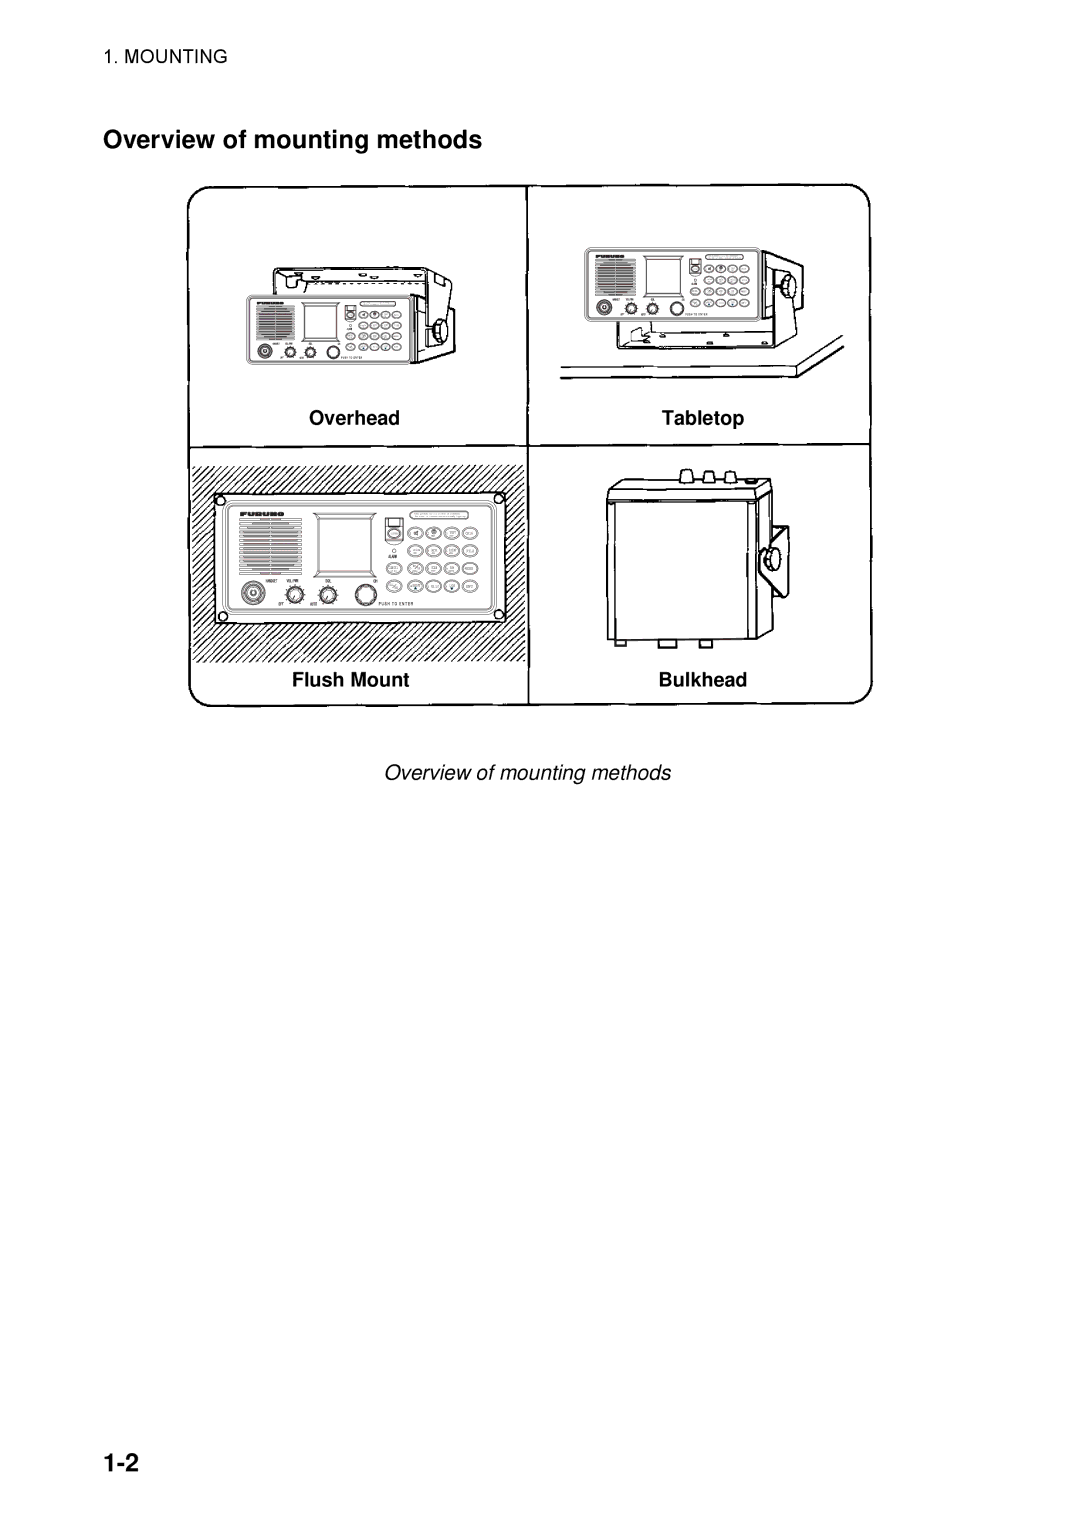 Furuno FM-8800D/8800S manual Overview of mounting methods, Overhead 